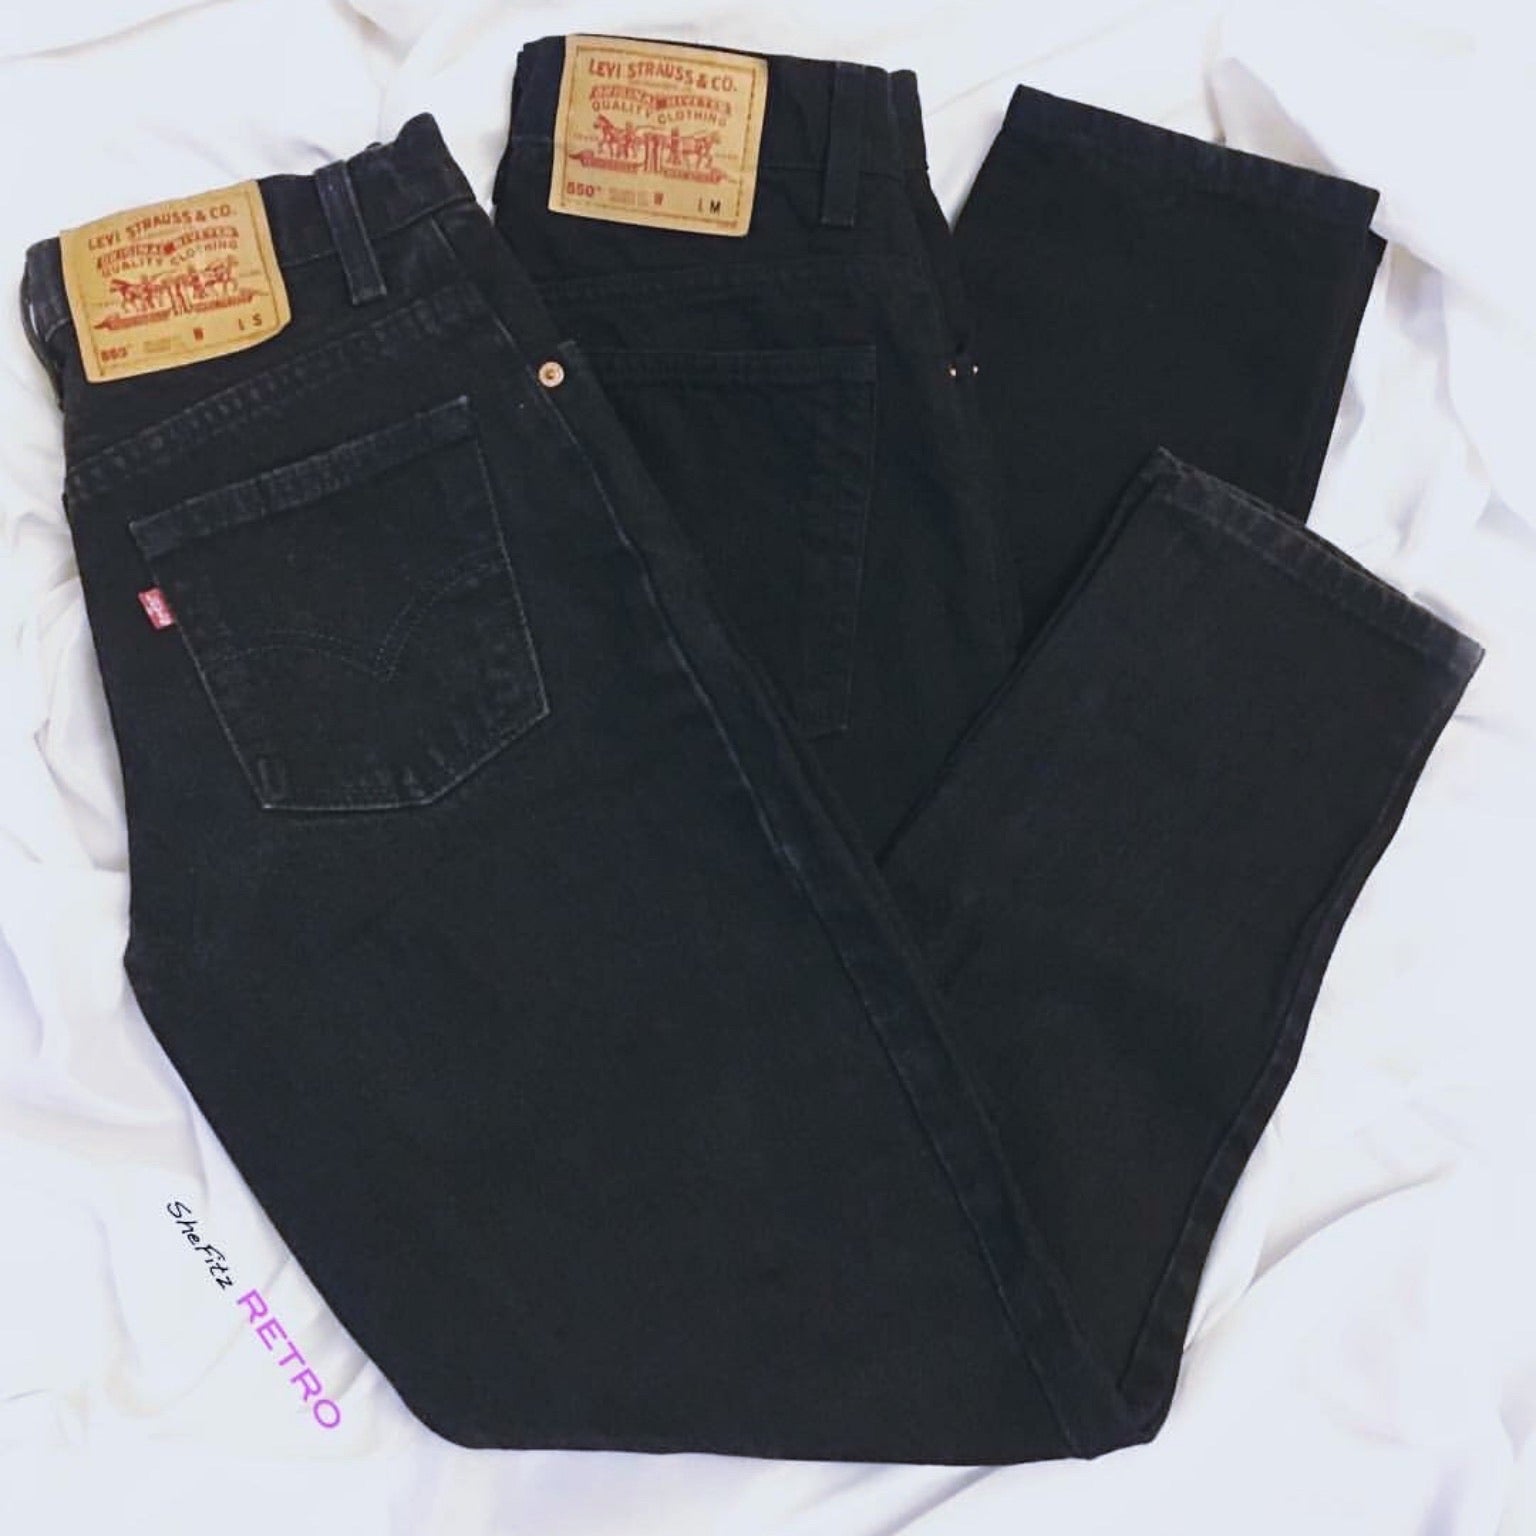 All Sizes Black Vintage High Waisted Tapered Levis Jeans